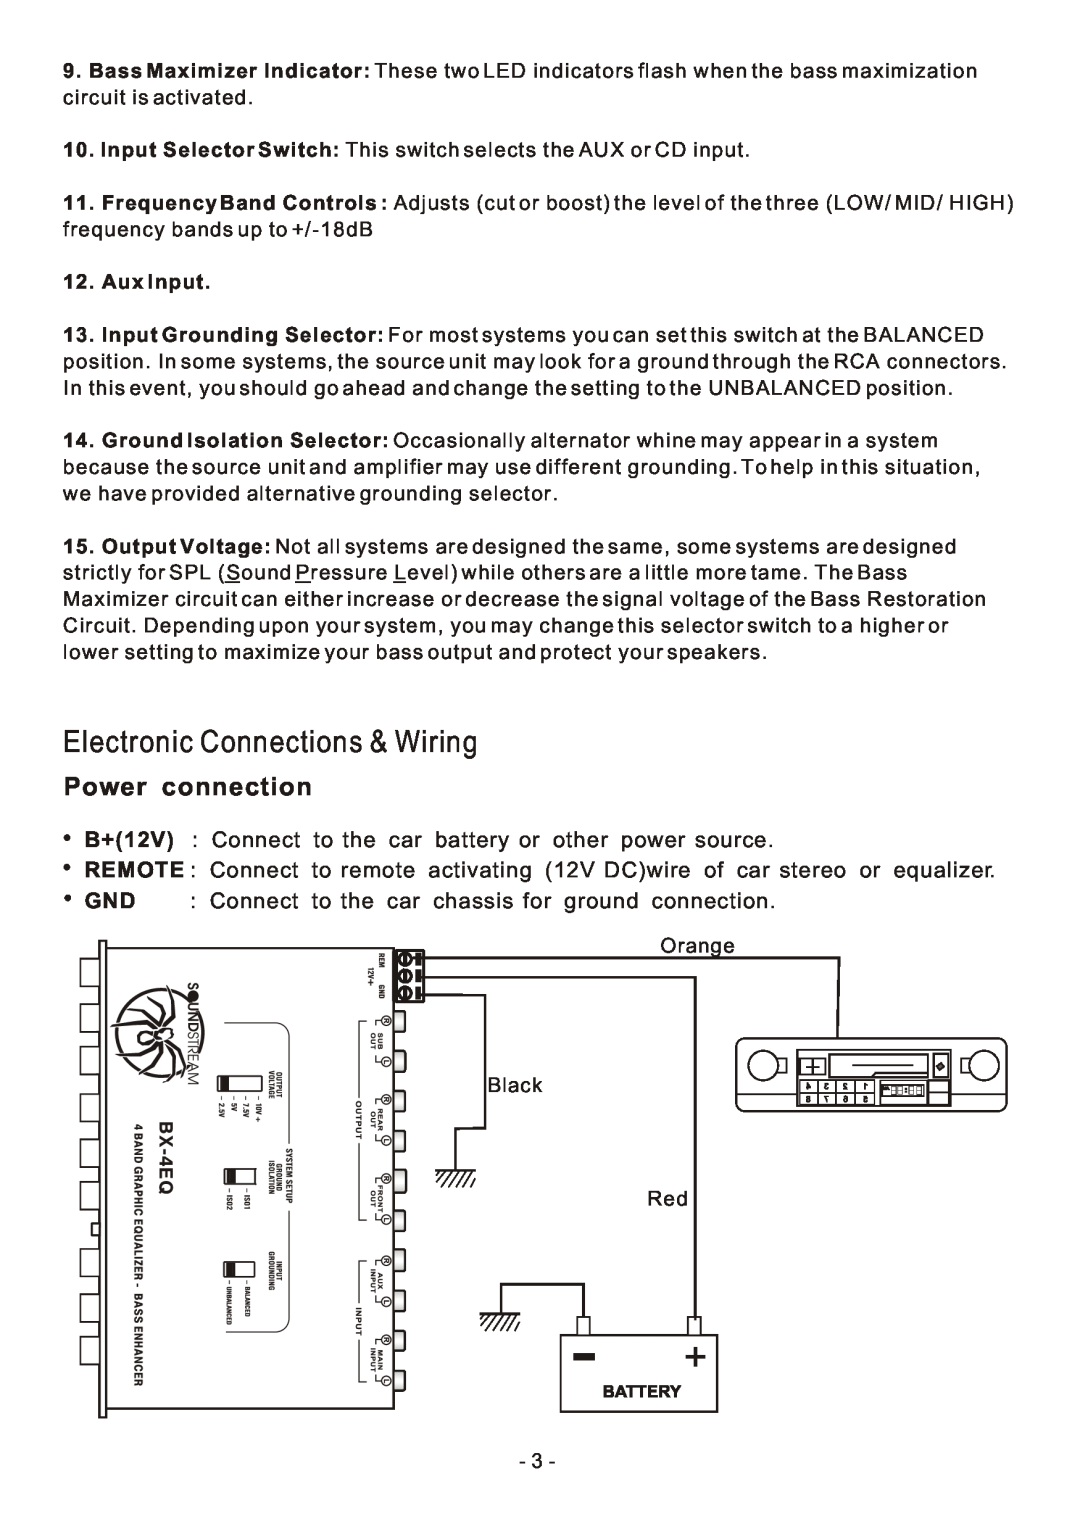 Soundstream Technologies BX-4EQ owner manual Electronic Connections & Wiring, Power connection, Aux Input 